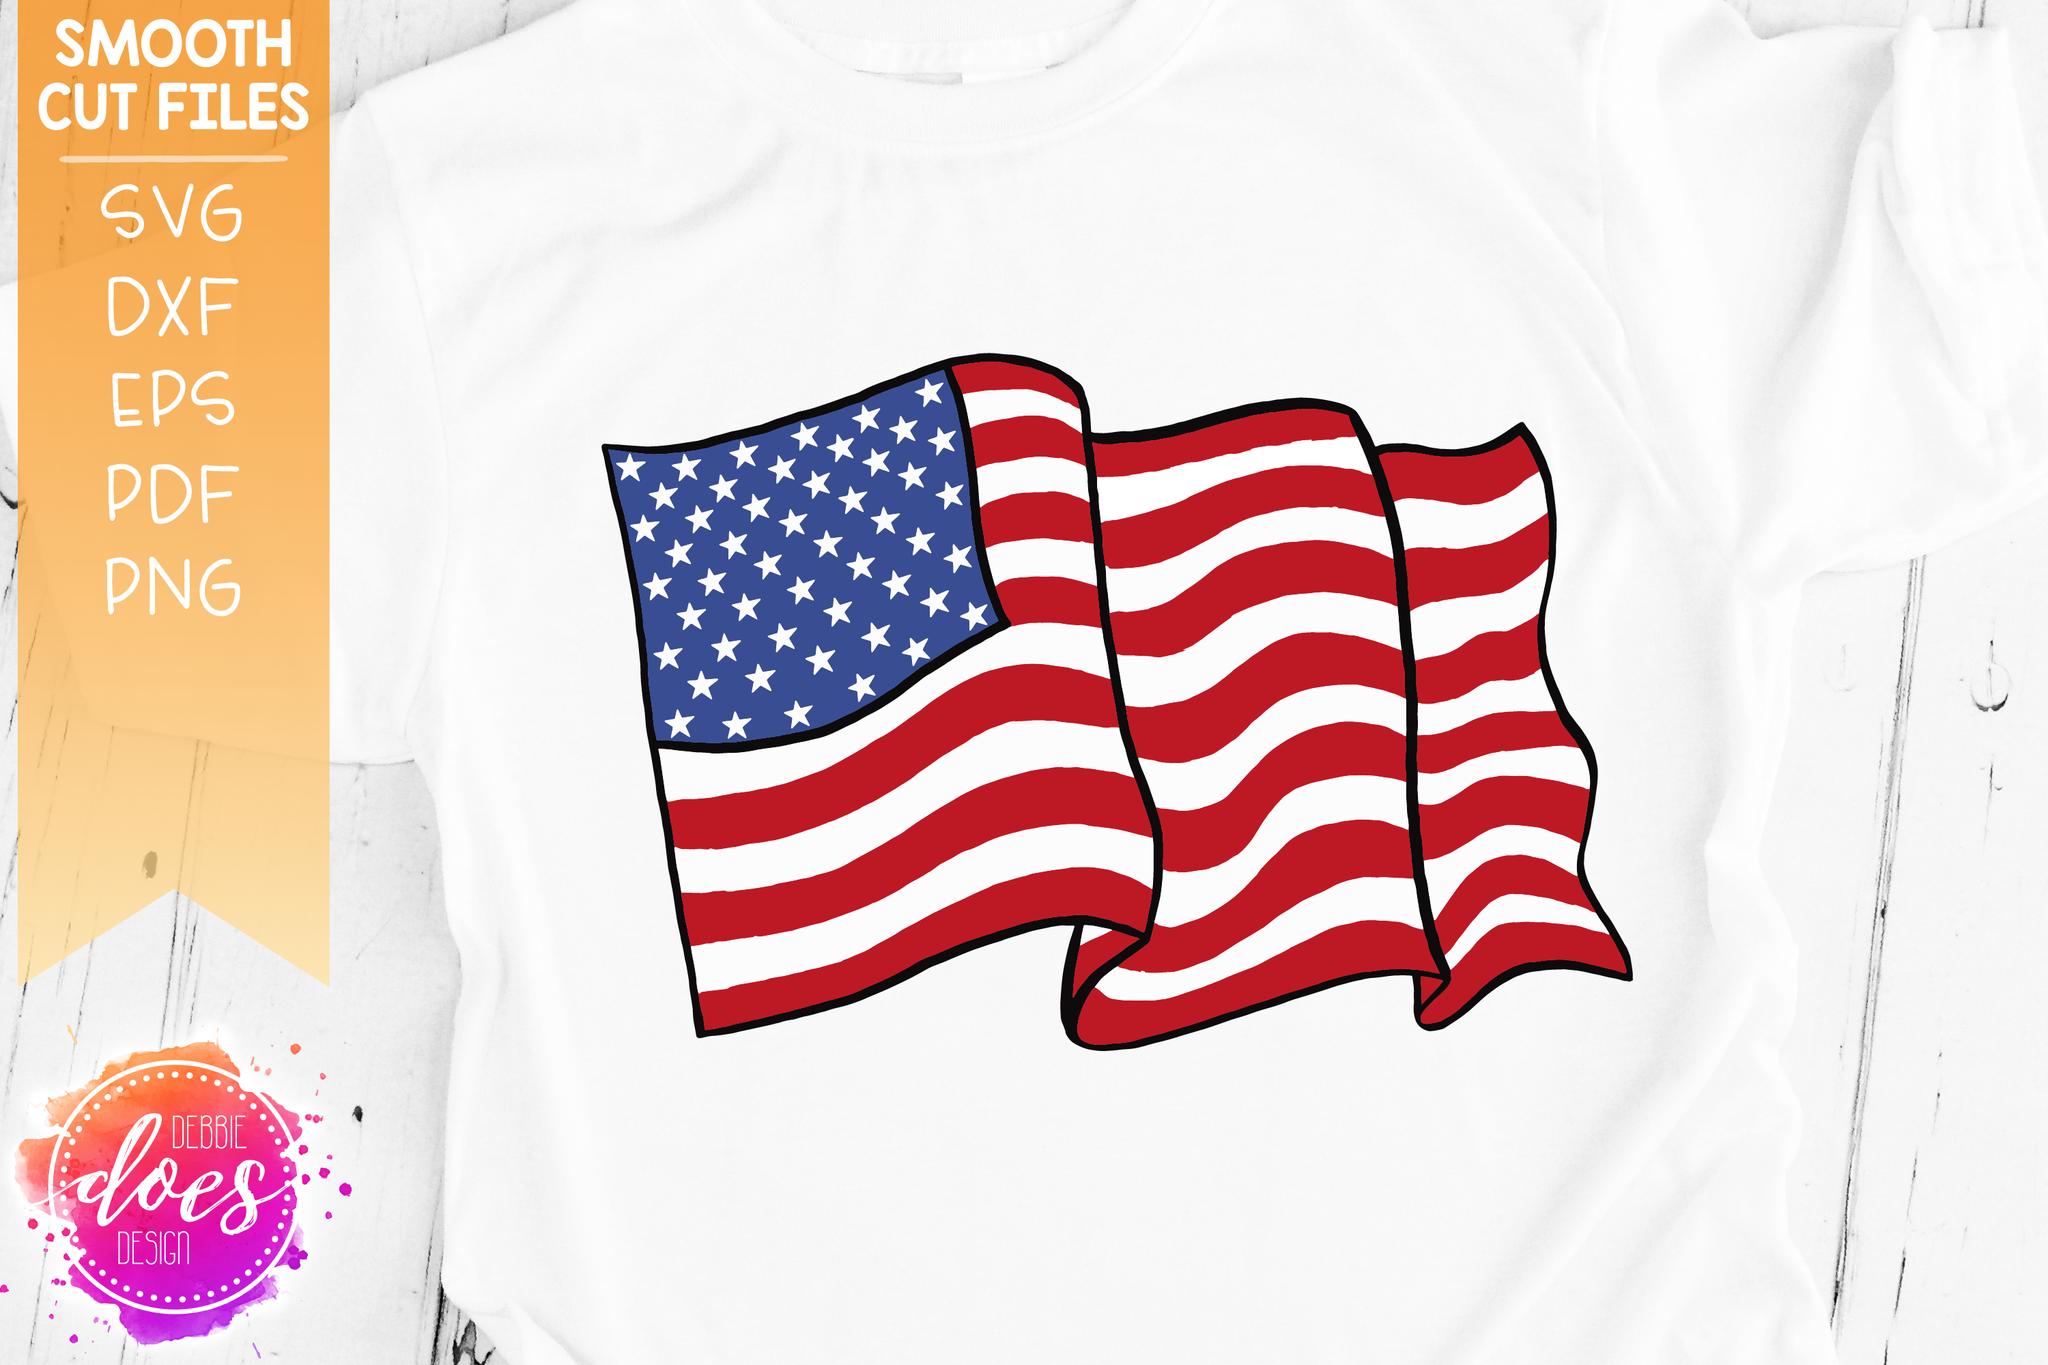 Download Tshirt Design Overlay Svg Dxf Eps Png Jpg Cut File America Word With Flag Clip Art Art Collectibles Delage Com Br